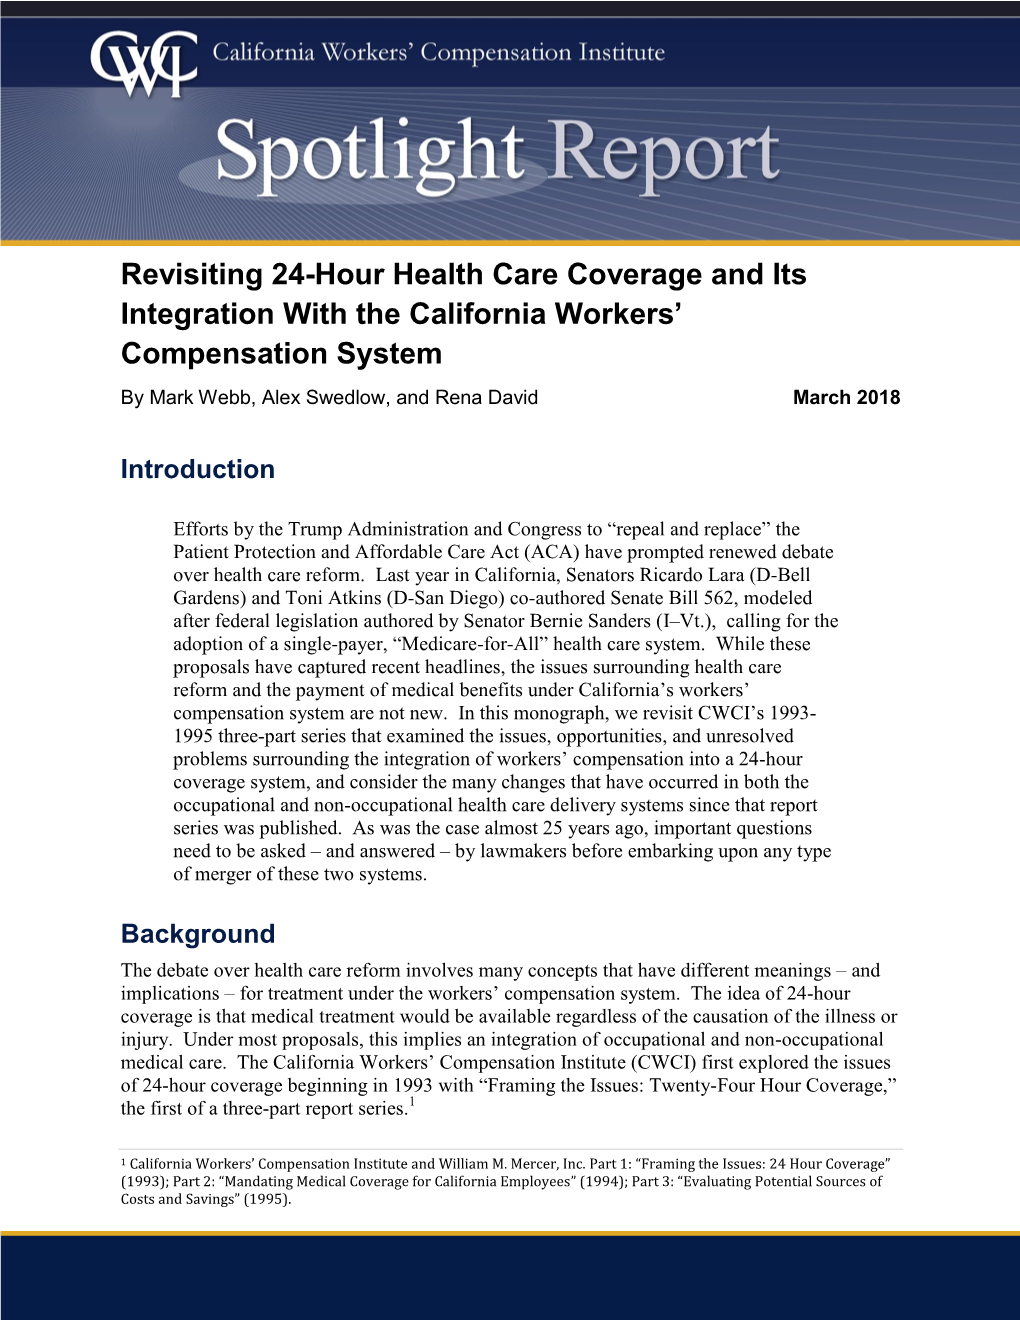 Revisiting 24-Hour Health Care Coverage and Its Integration with the California Workers’ Compensation System by Mark Webb, Alex Swedlow, and Rena David March 2018